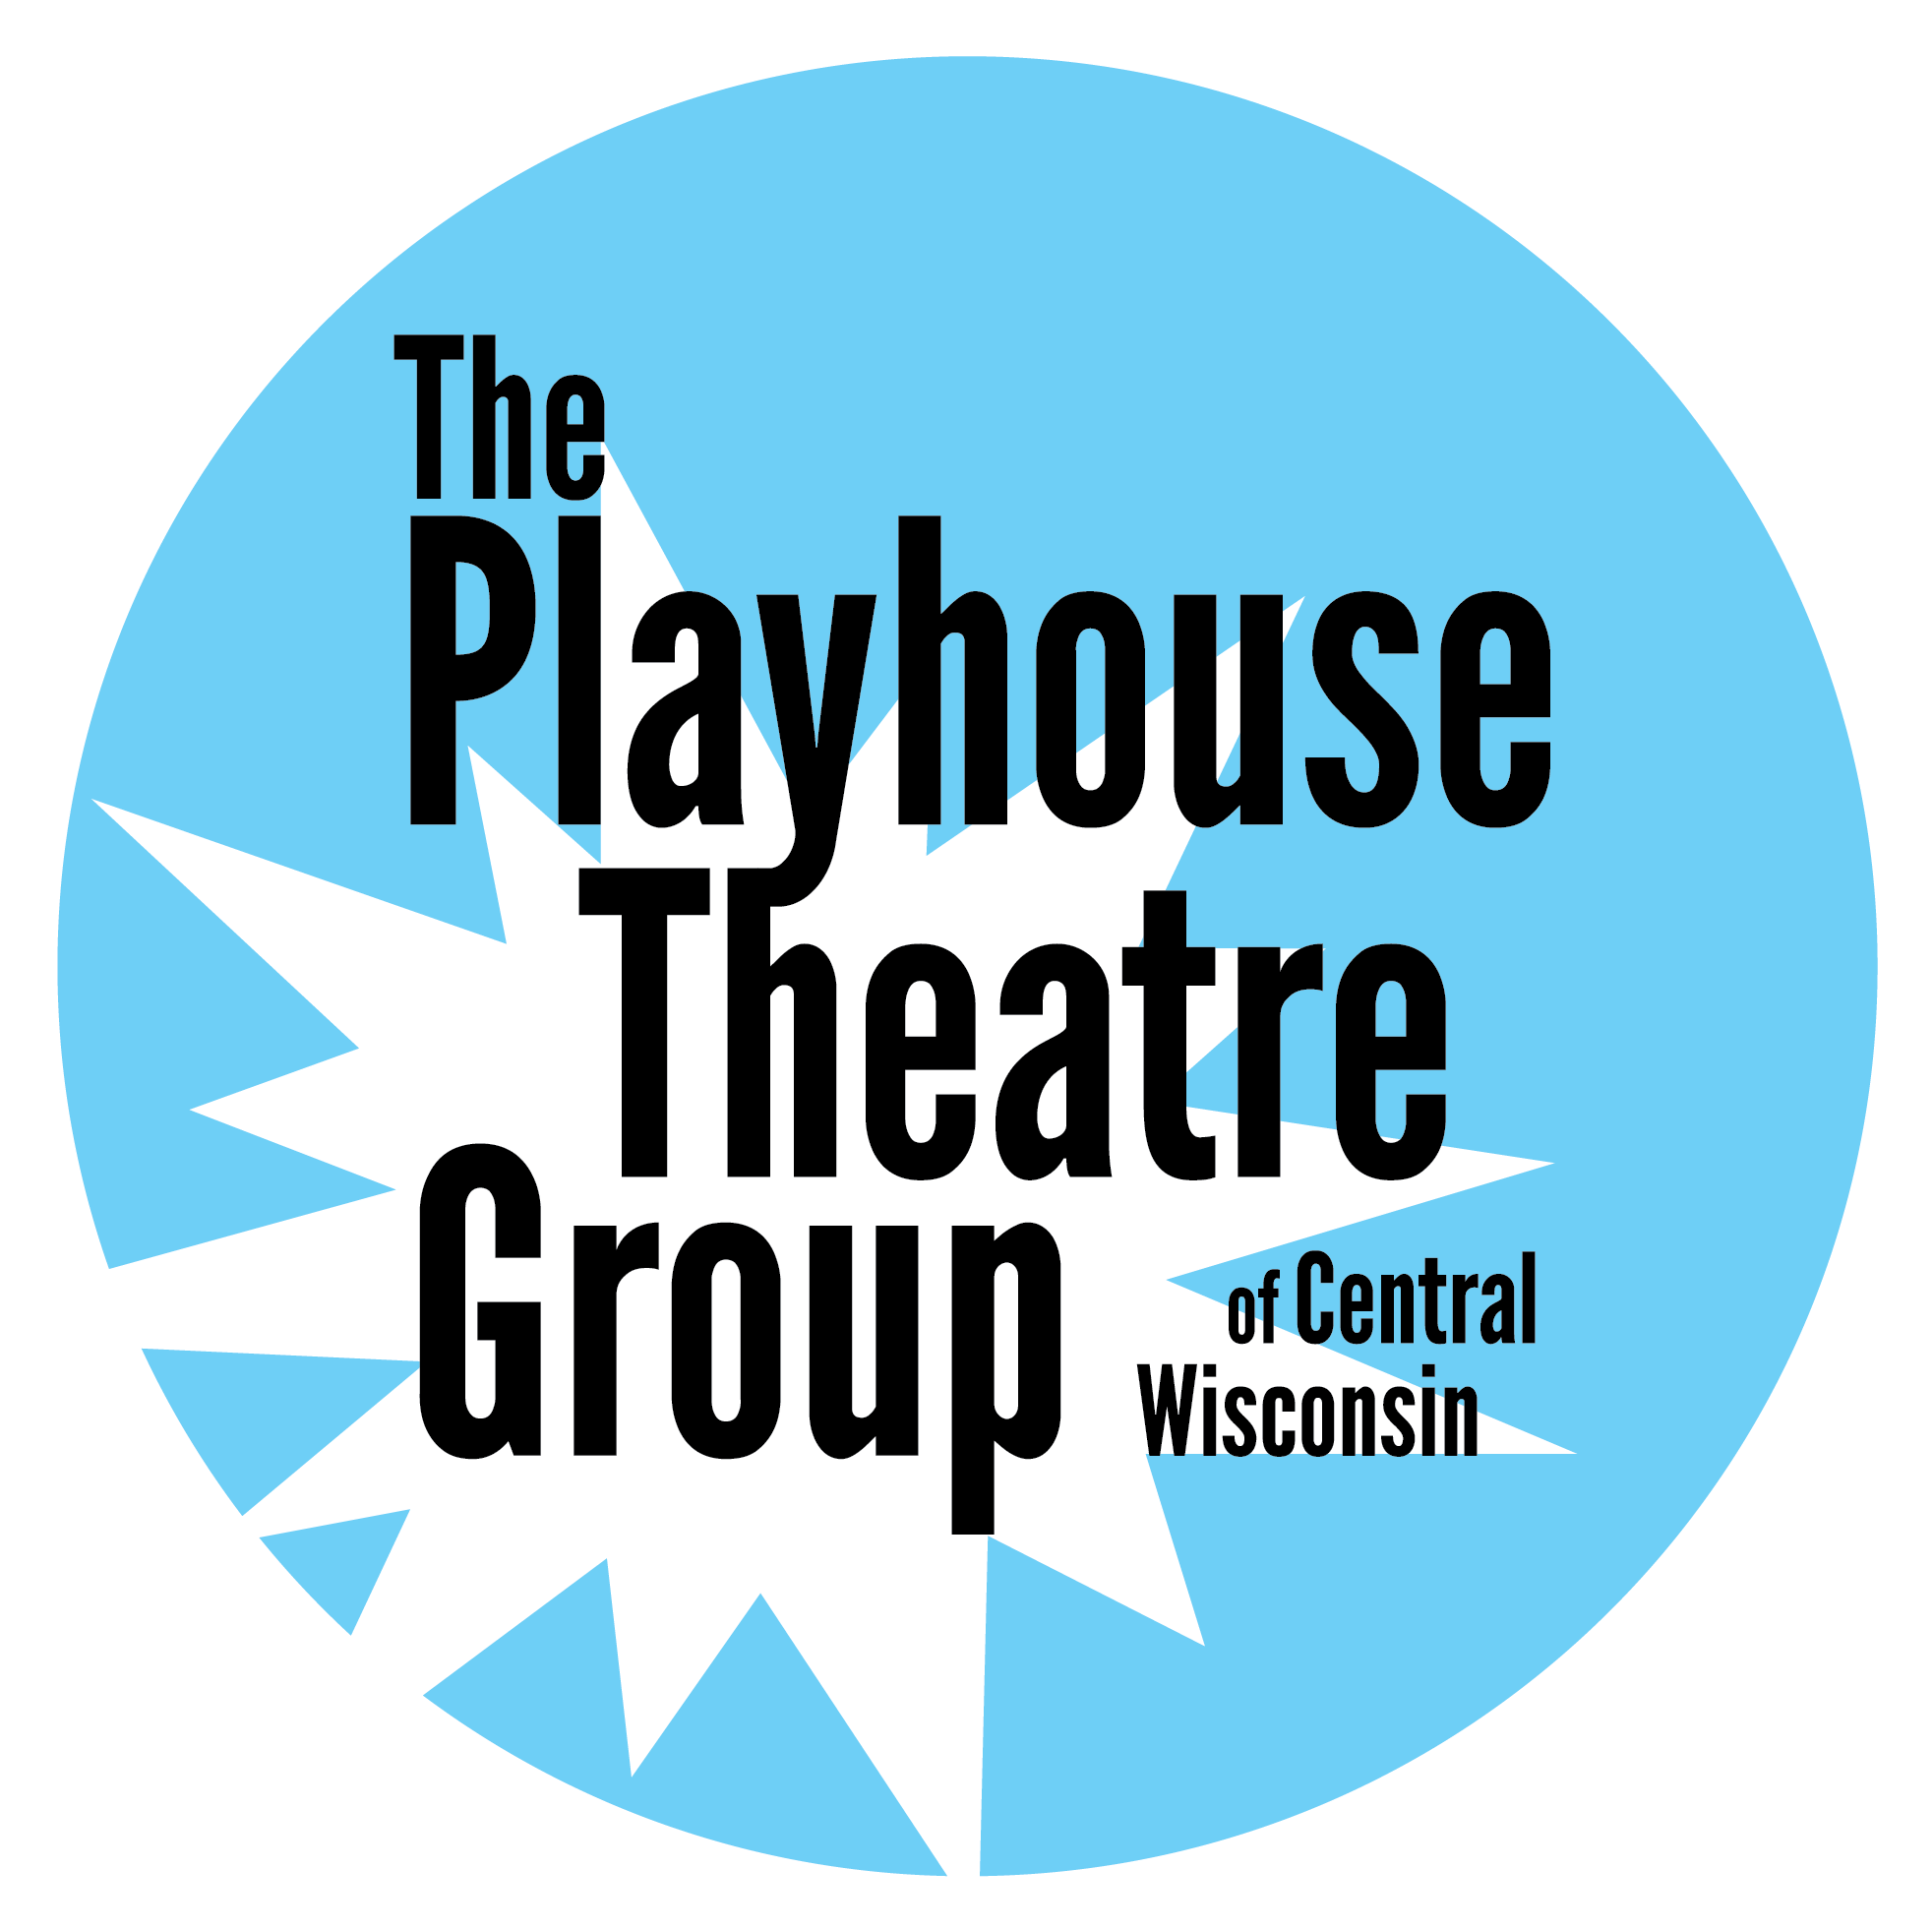 Playhouse Theater Group